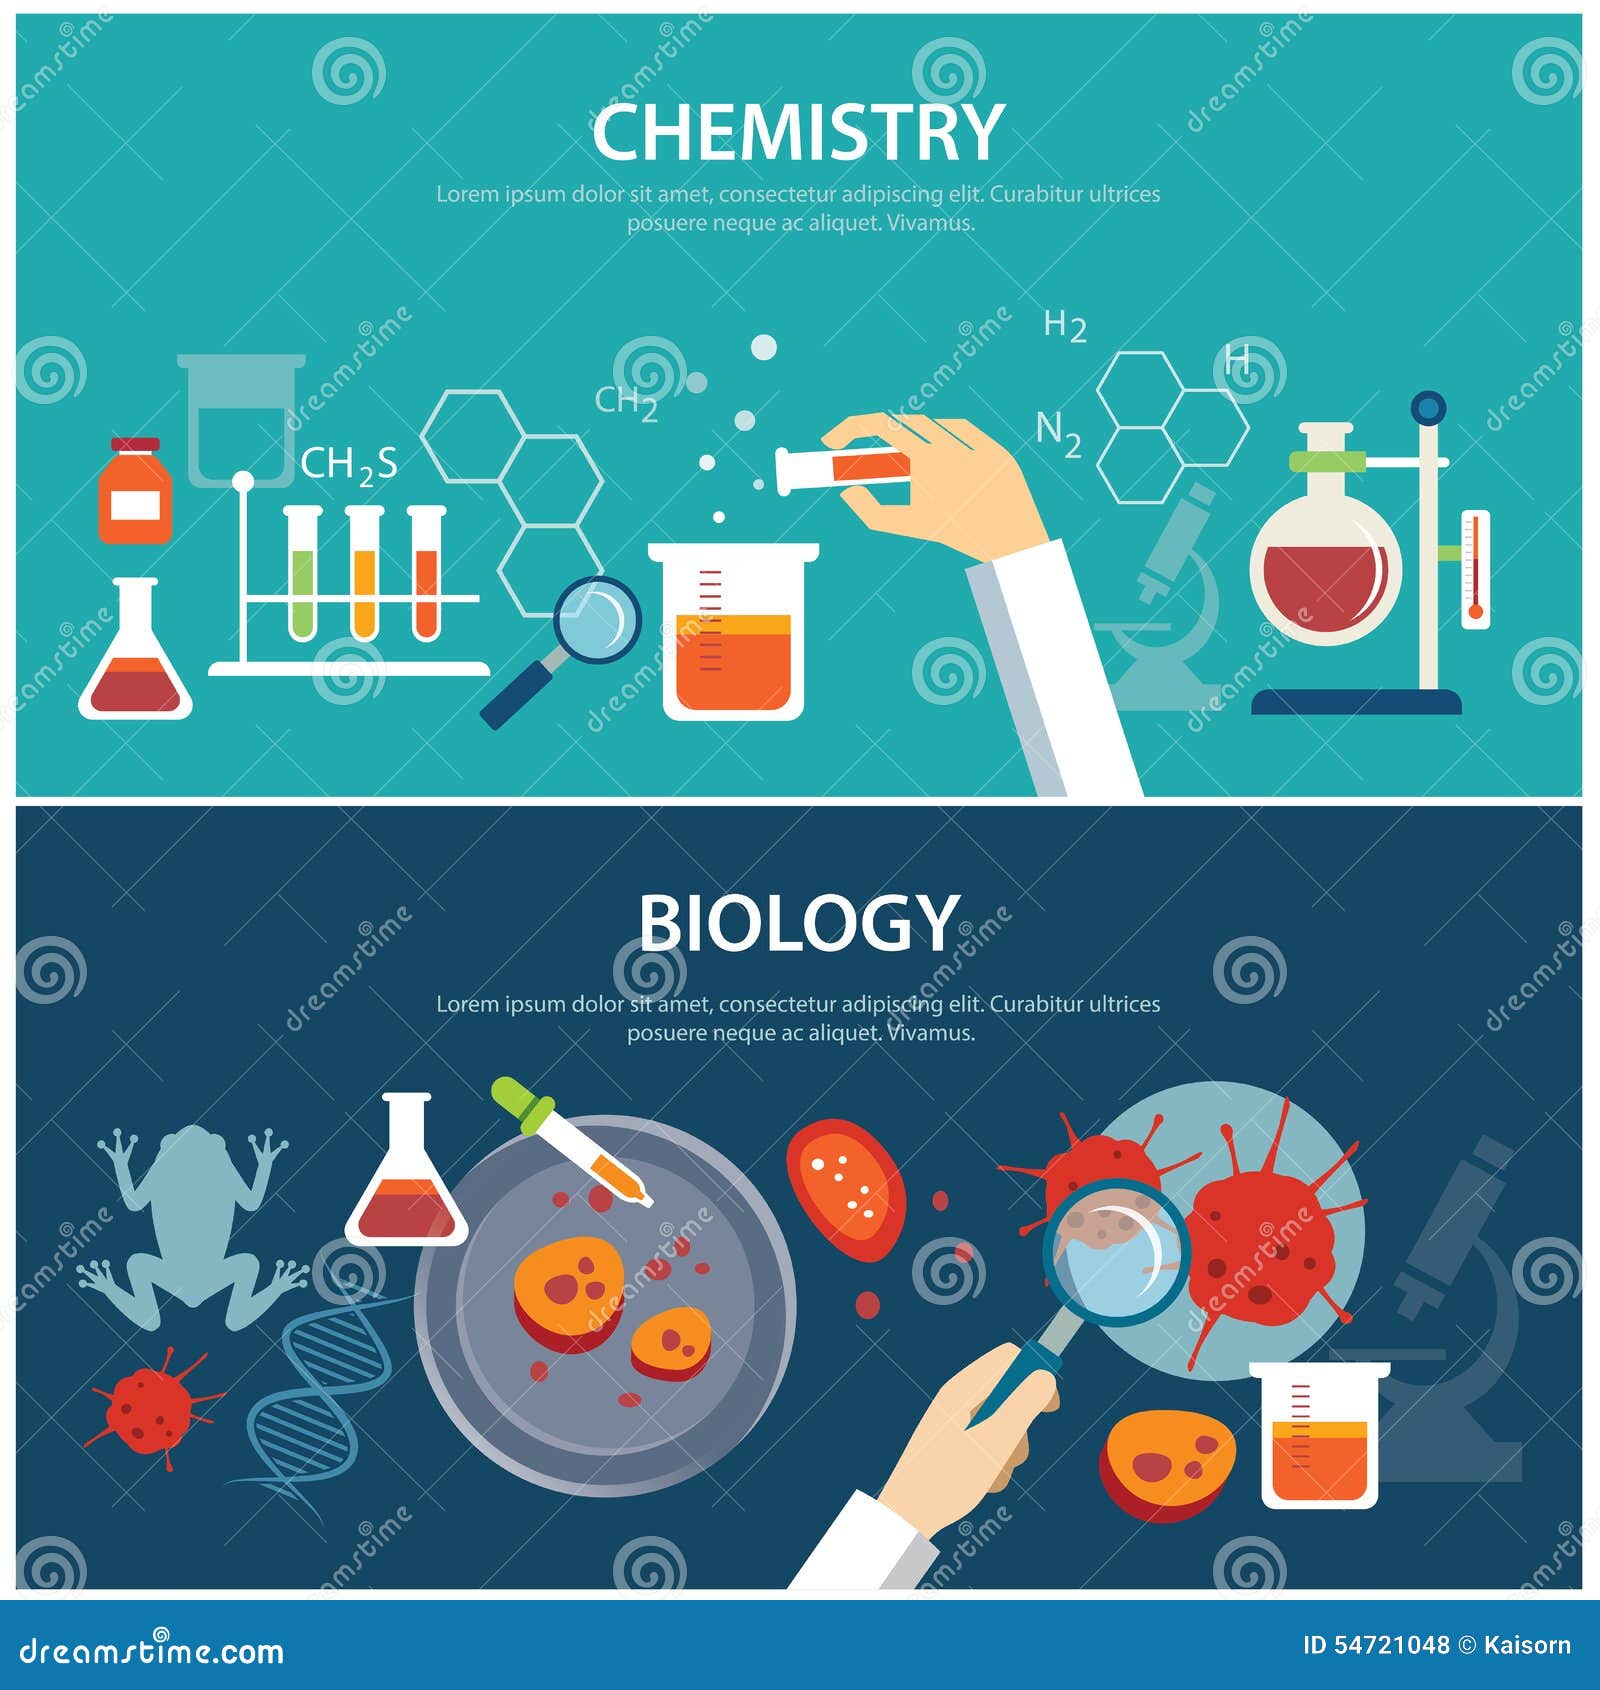 chemistry and biology education concept